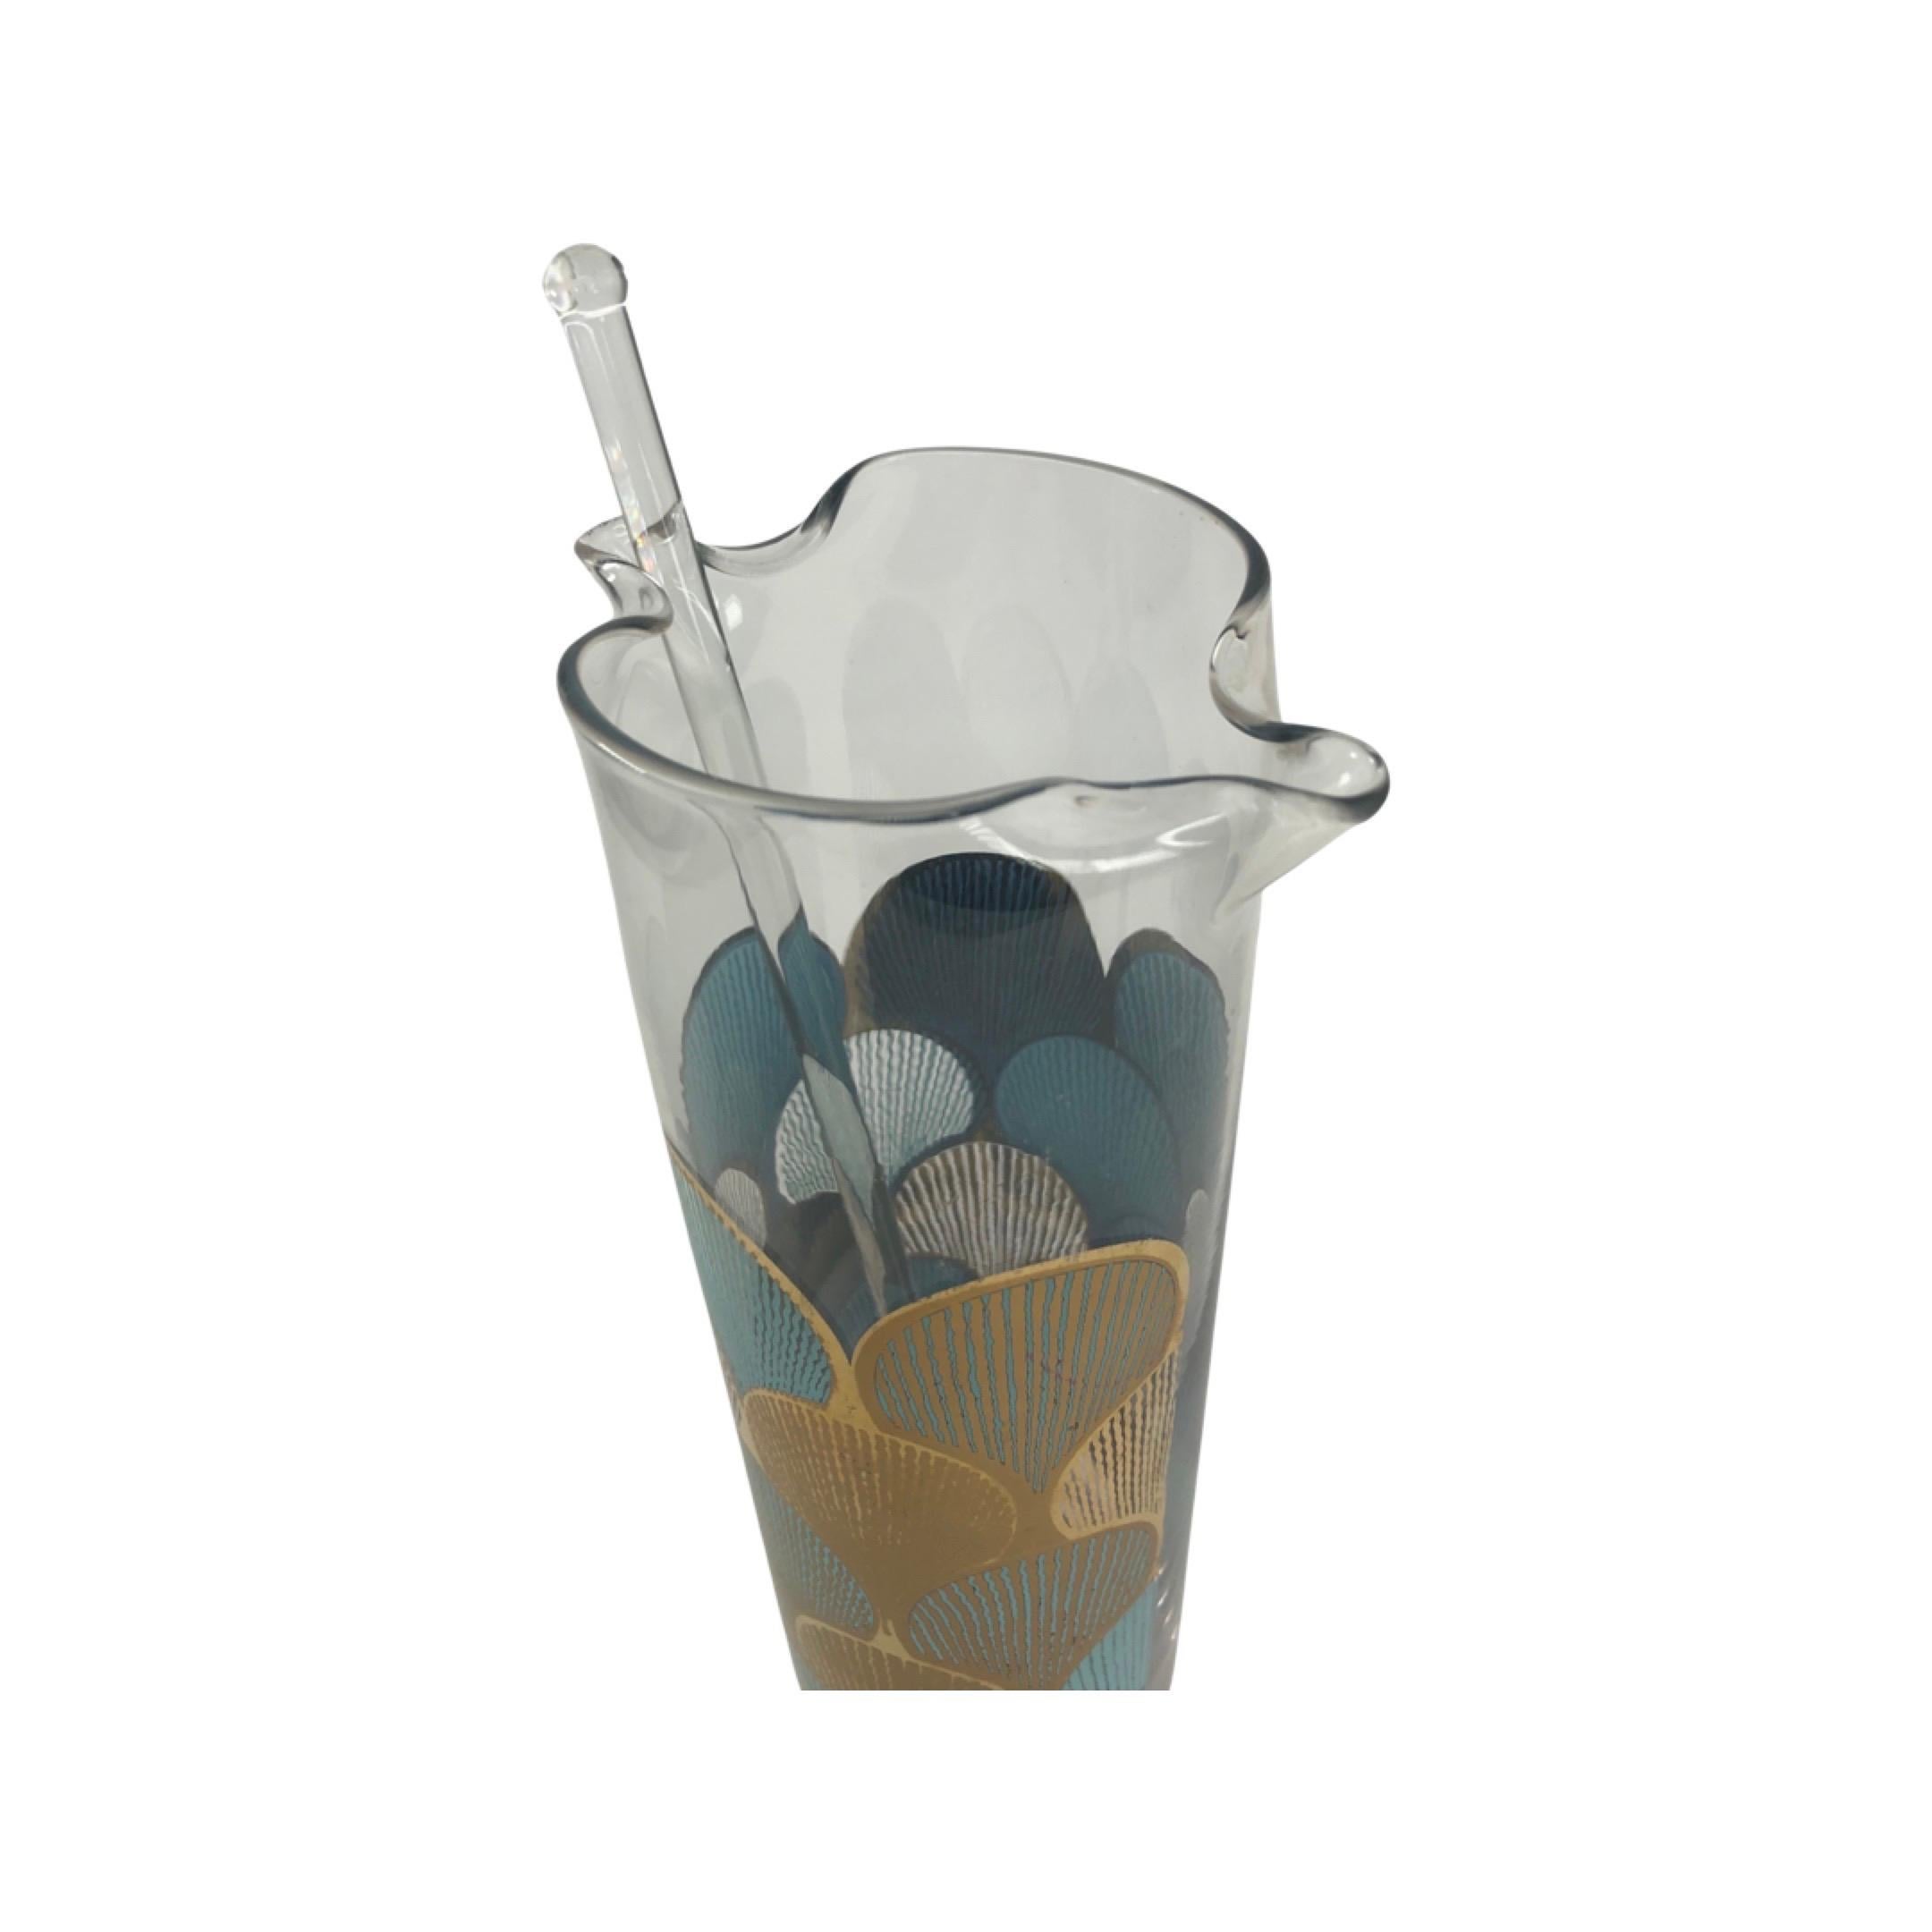  A fun vintage Cocktail Set with stylized shell motif design in light blue and gold decoration. Set comes with a large cocktail mixer or pitcher and a glass mixing rod, six single rocks glasses. A nice addition to any fun gathering. Glasses measure